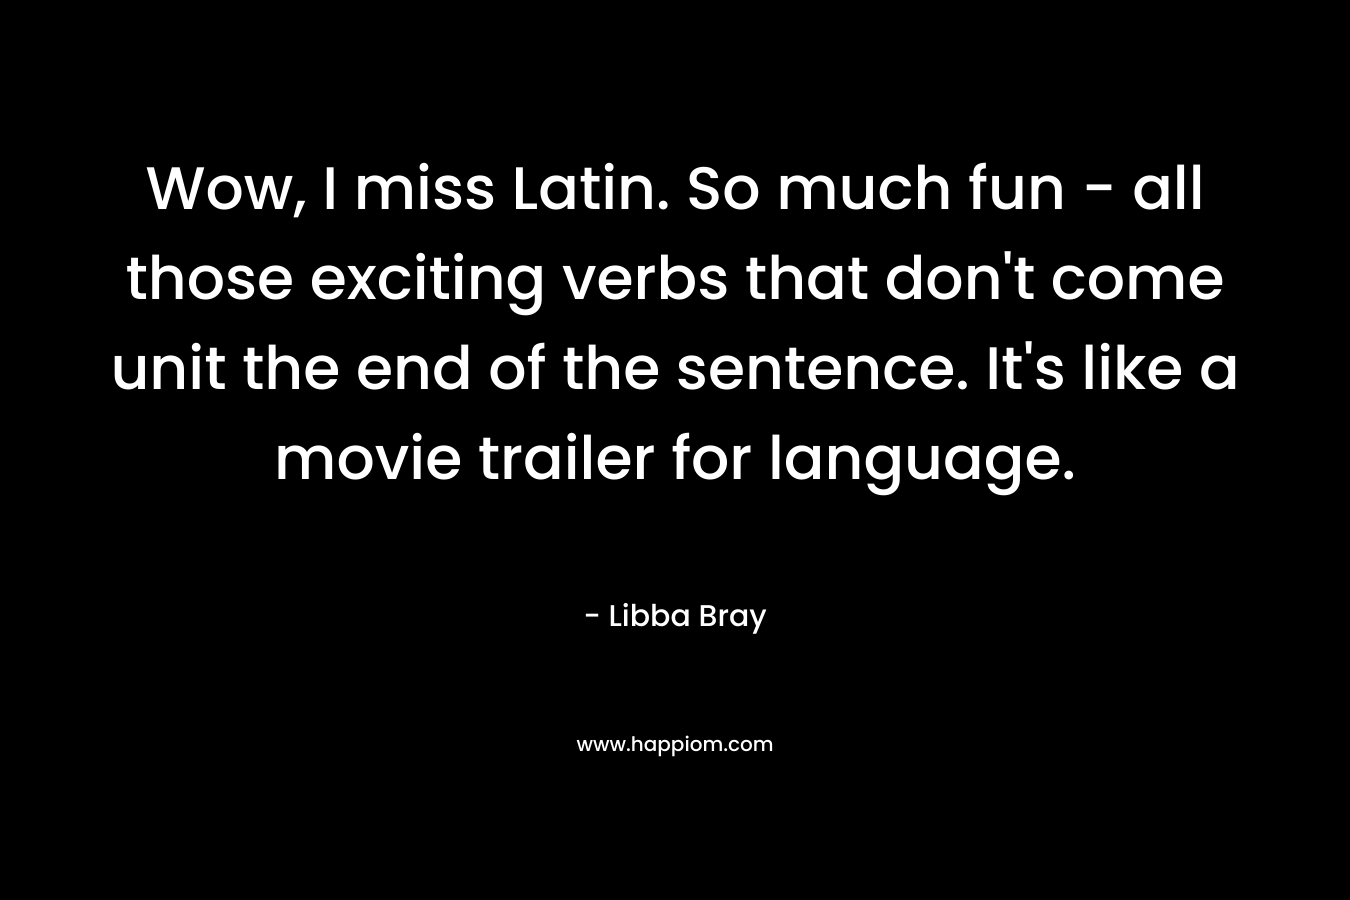 Wow, I miss Latin. So much fun - all those exciting verbs that don't come unit the end of the sentence. It's like a movie trailer for language.